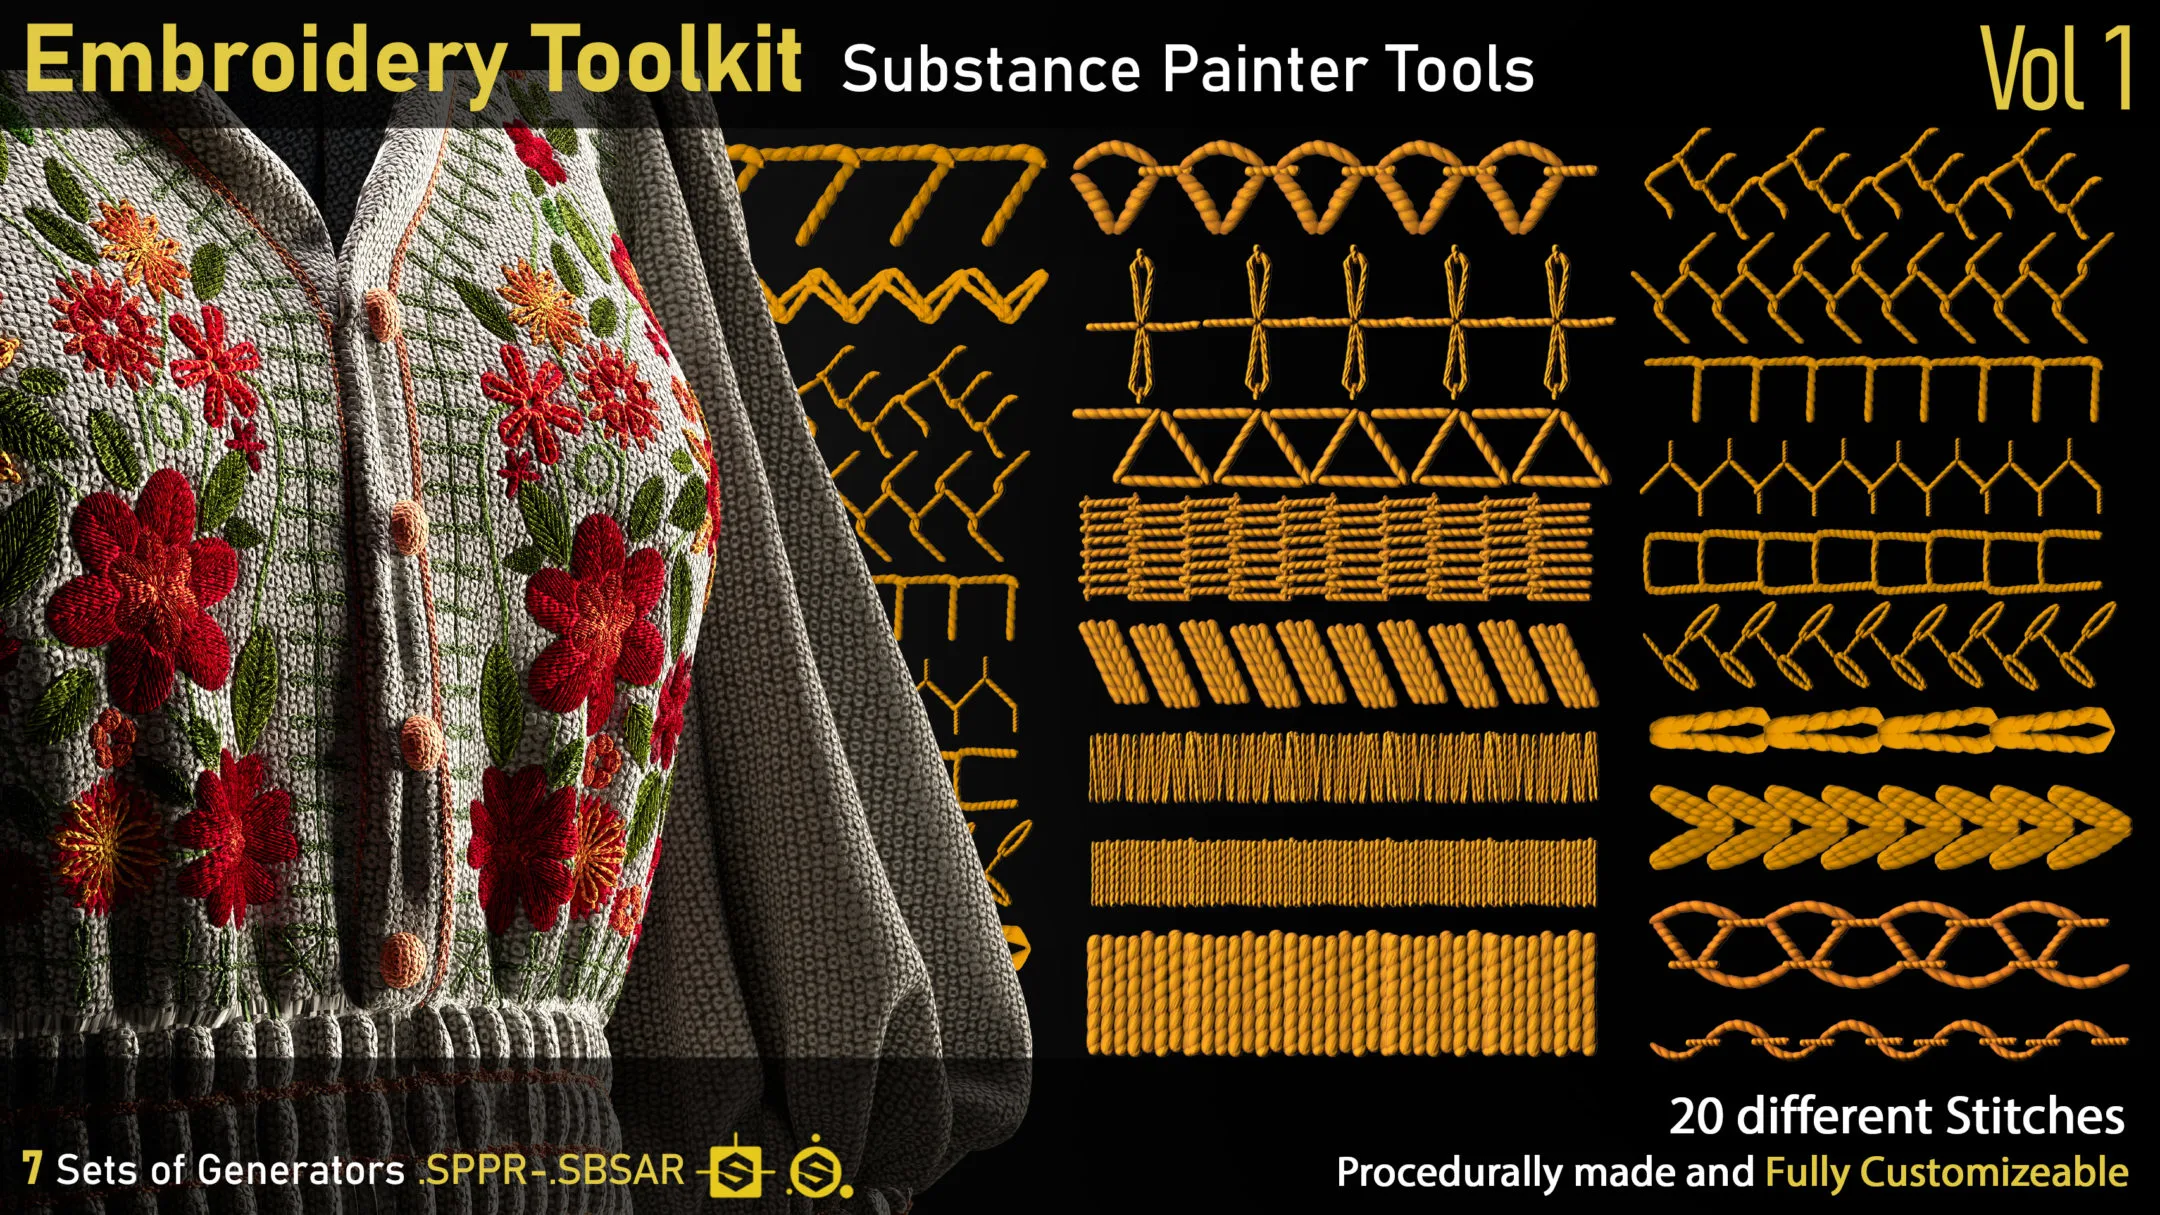 Embroidery Toolkit-Substance Painter tools-Vol1-sppr-sbsar